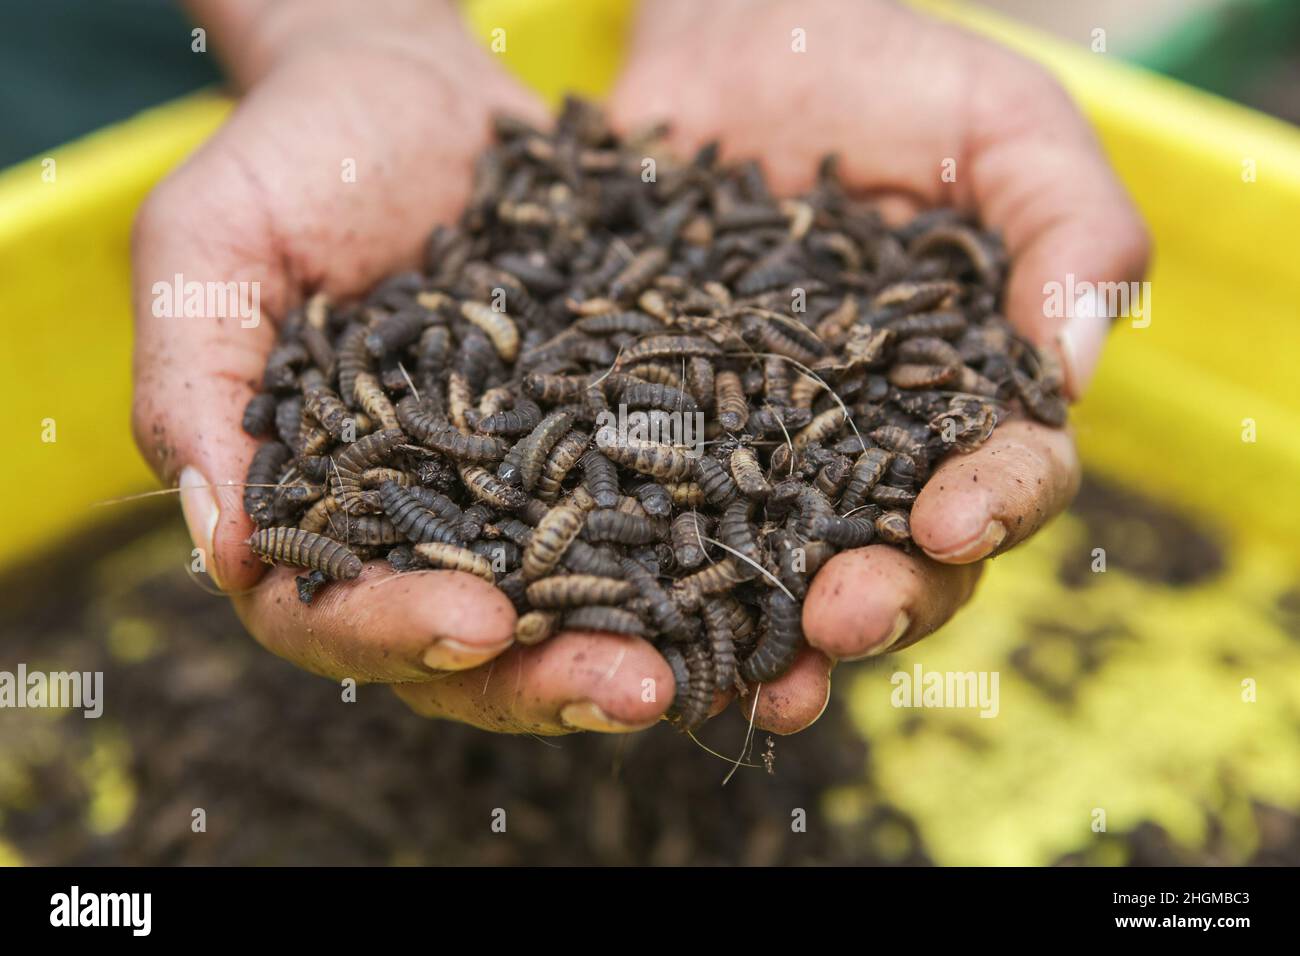 Fresh Larvae and Pupa of Black Soldier fly, at the farm in Lower Kabete.  Zihanga (meaning Zero Hunger) is a waste recycling farm of organic waste  such as animal waste from slaughterhouses